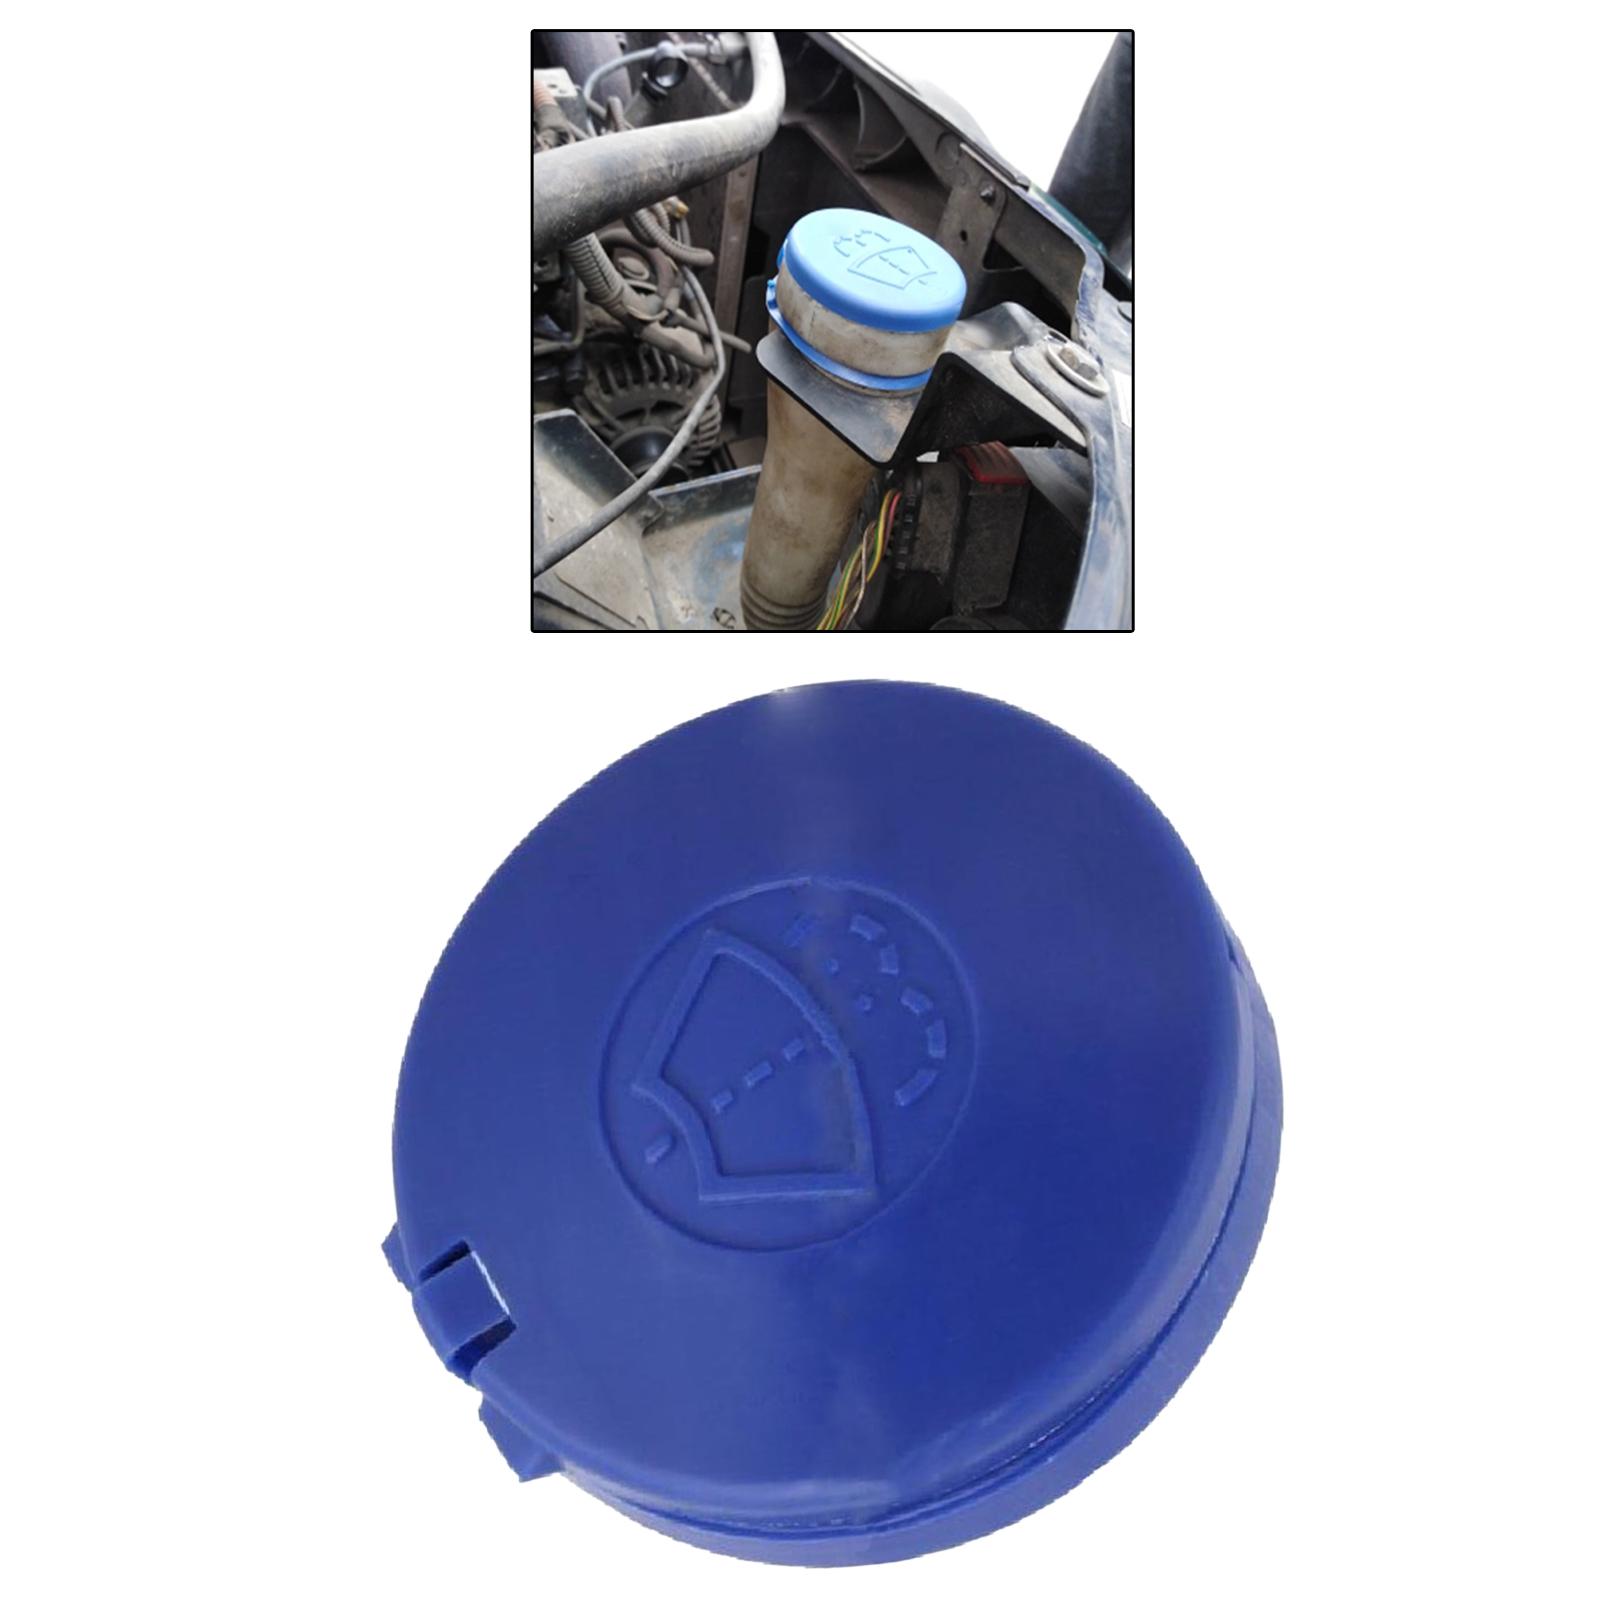 Blue cap of the tank for windshield washer fluid, close up Stock Photo -  Alamy